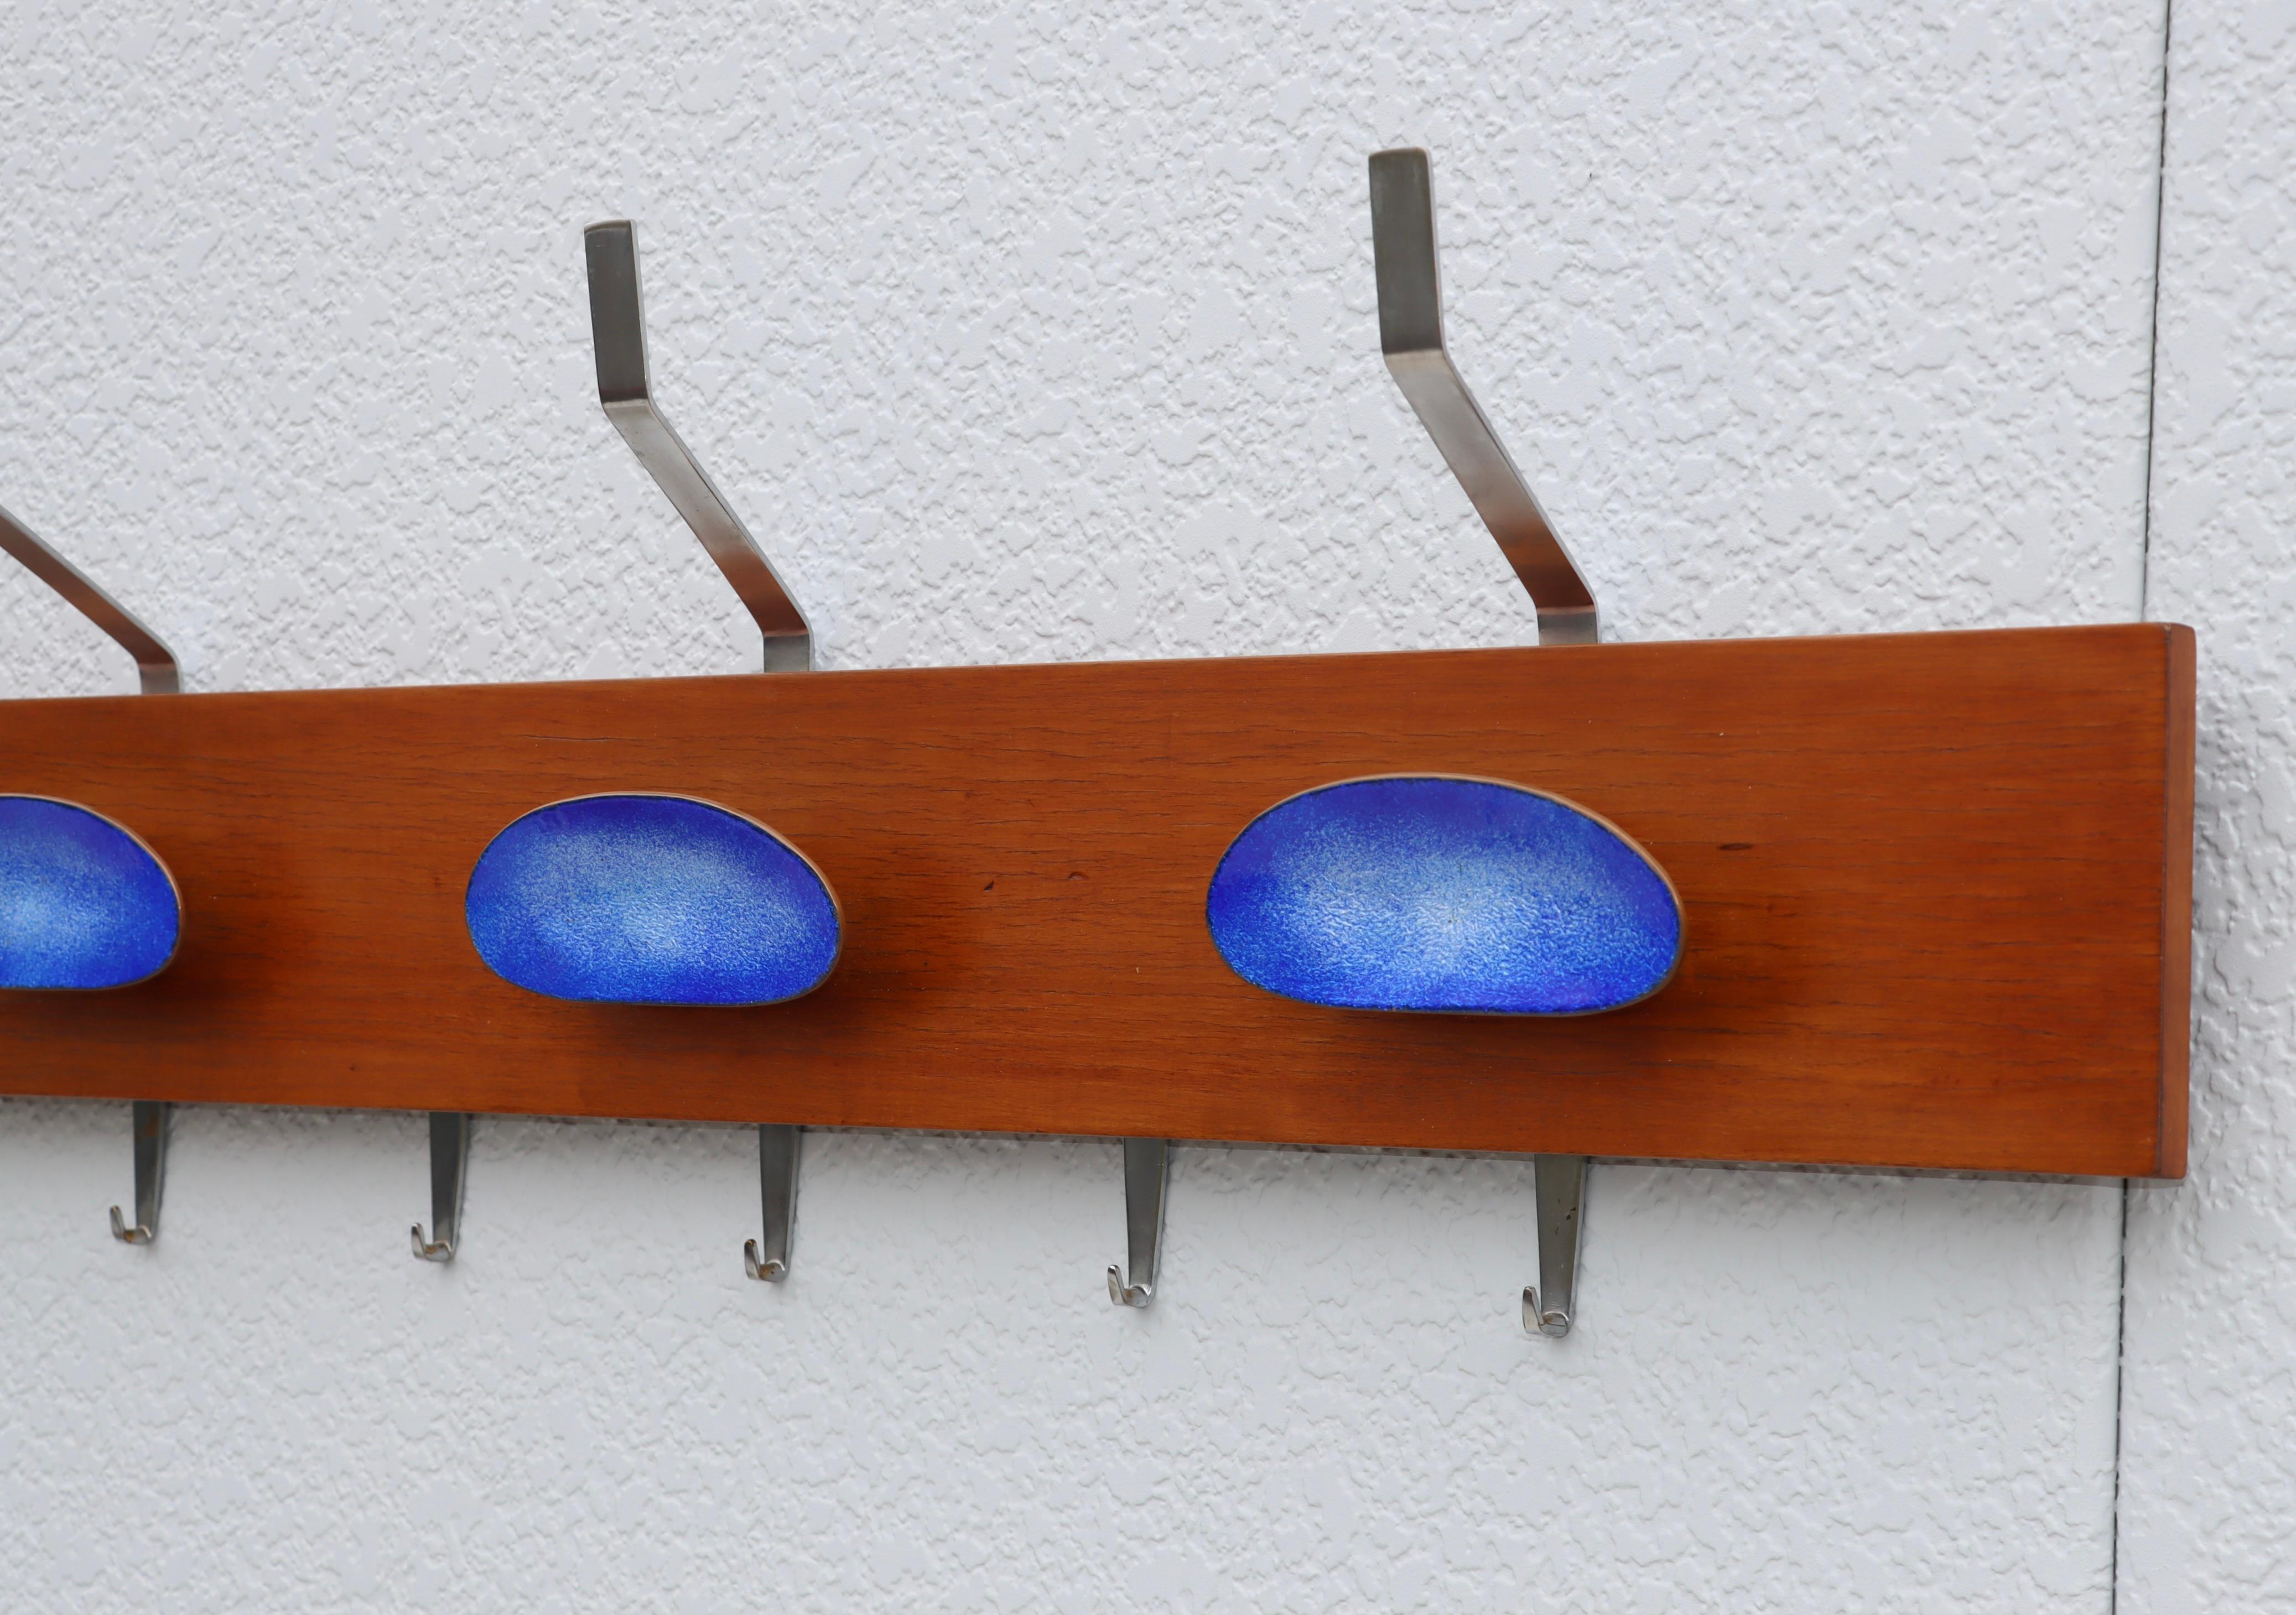 Paolo De Poli Attributed Enamel and Walnut Wall Mounted Coat Rack For Sale 6